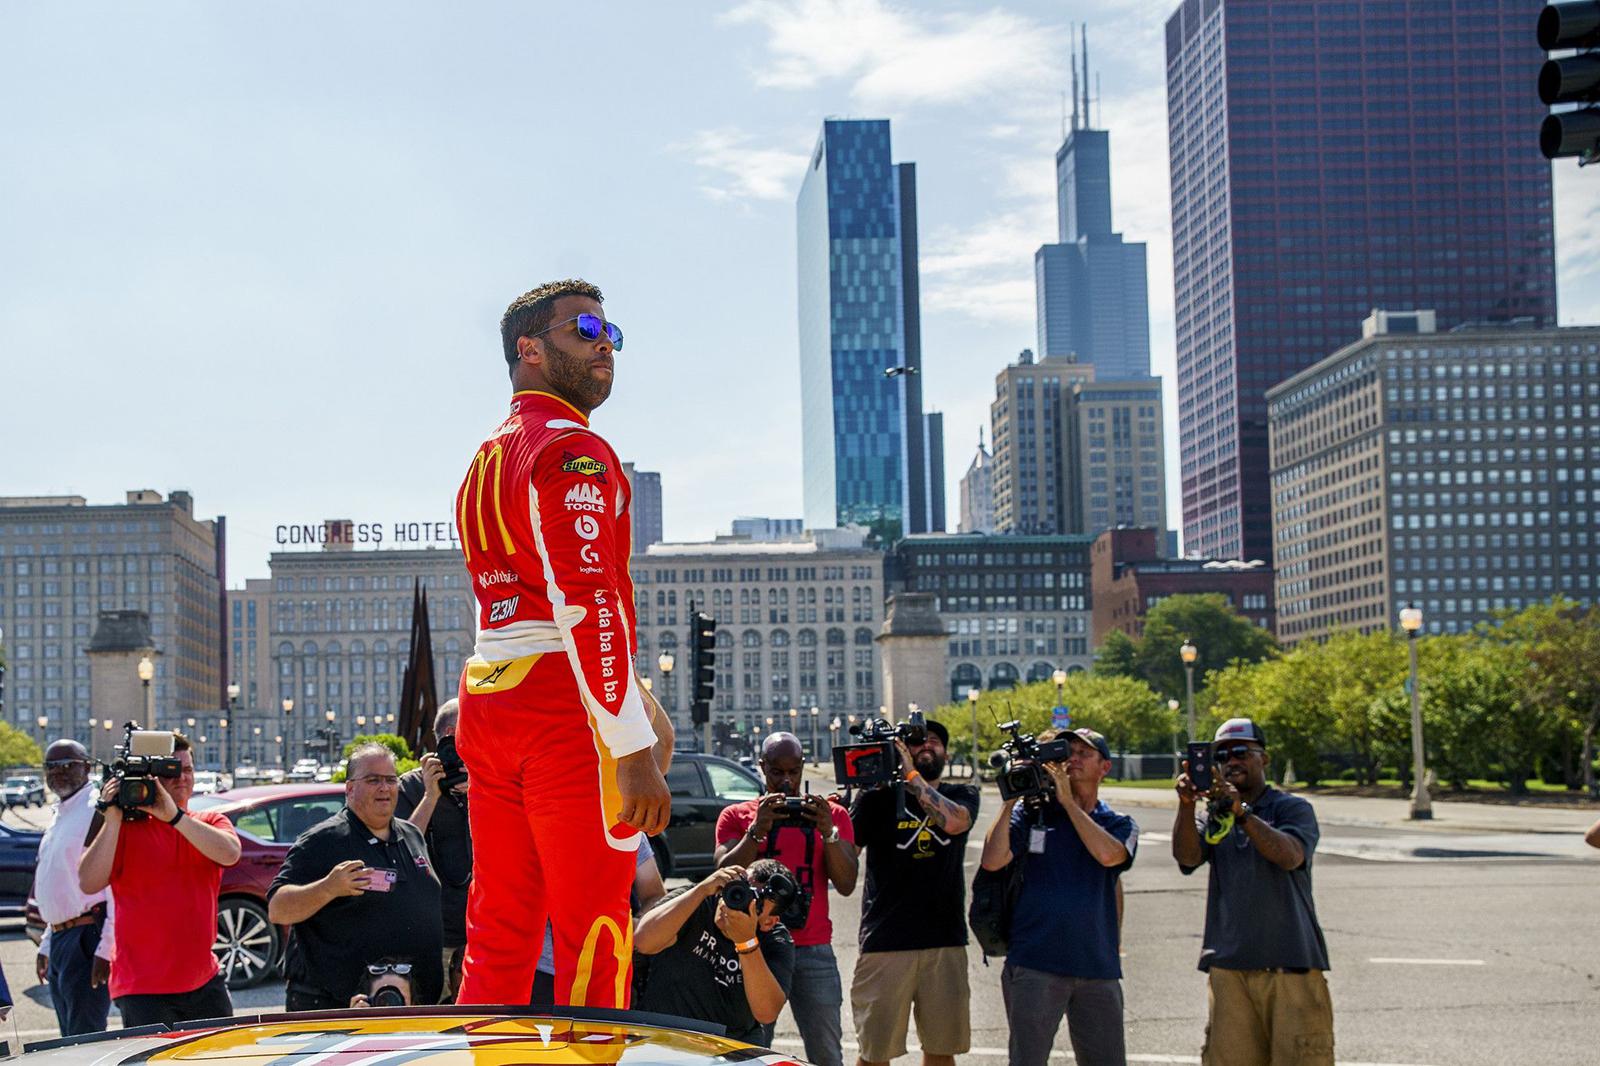 NASCAR driver Bubba Wallace stands on a race car after driving through Grant Park after Mayor Lori Lightfoot announced the city will host a NASCAR street race next year, July 19, 2022 in Chicago.